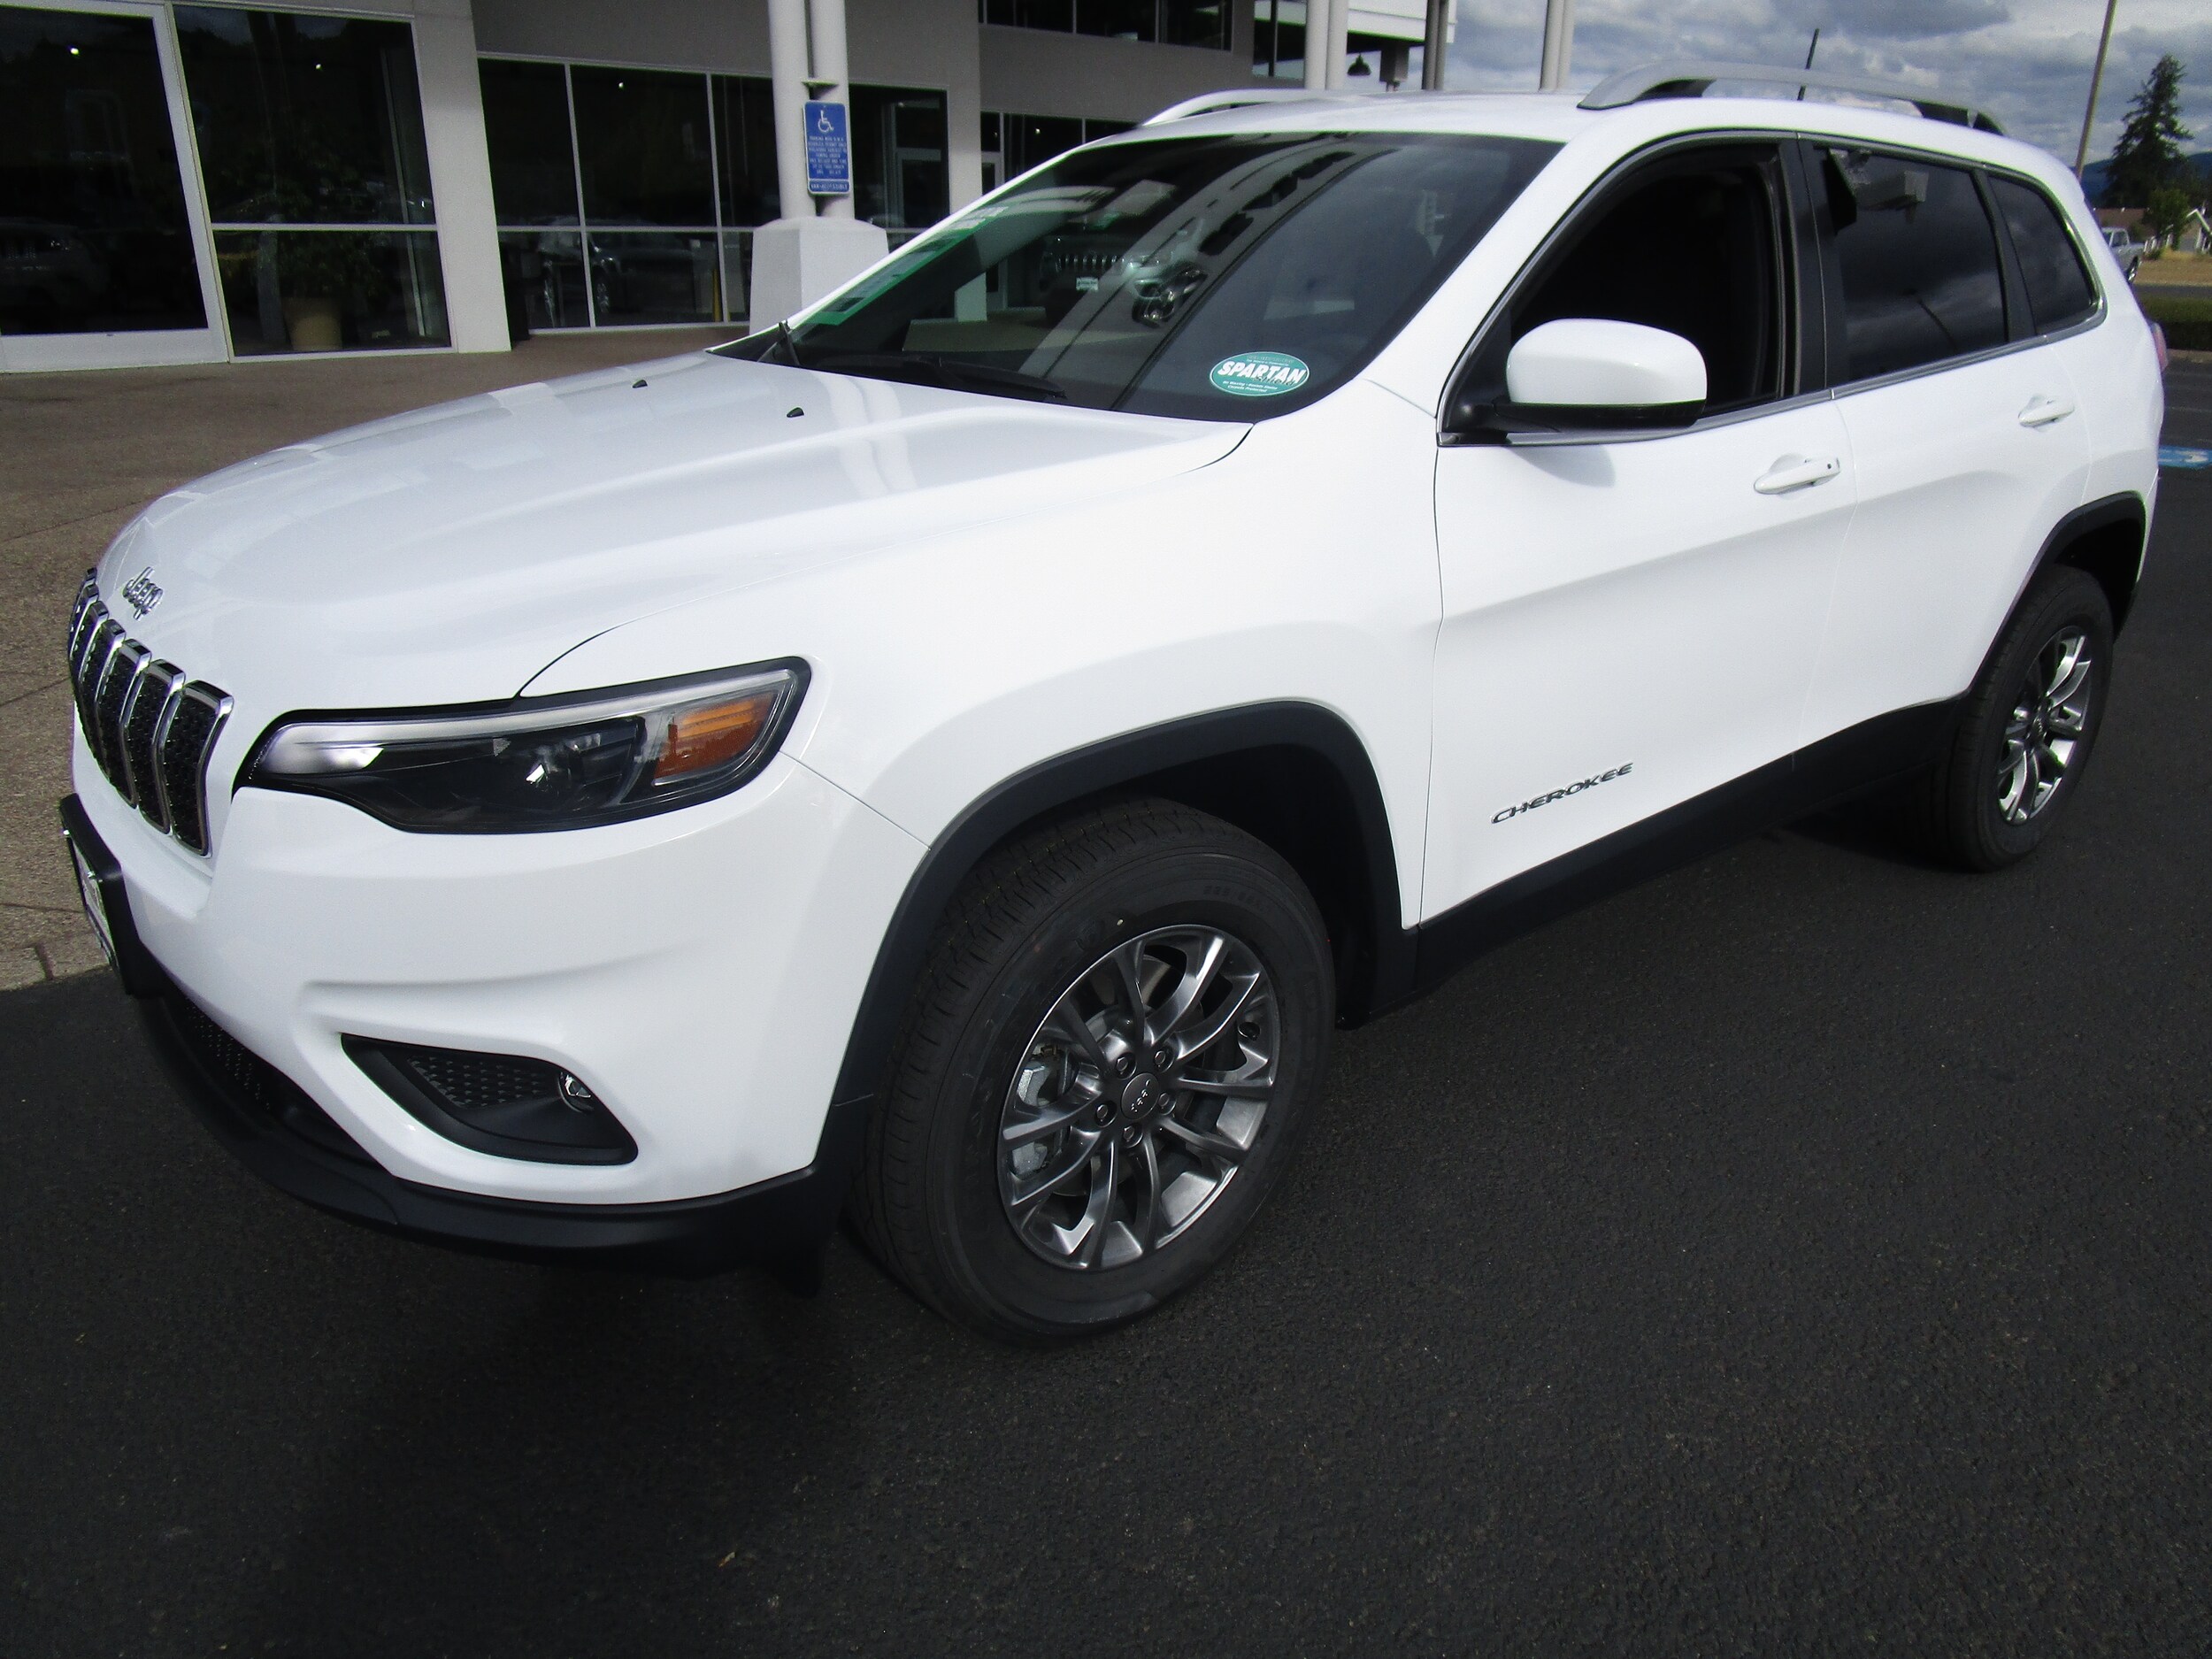 New 2019 Jeep Cherokee Latitude Plus 4x4 For Sale In